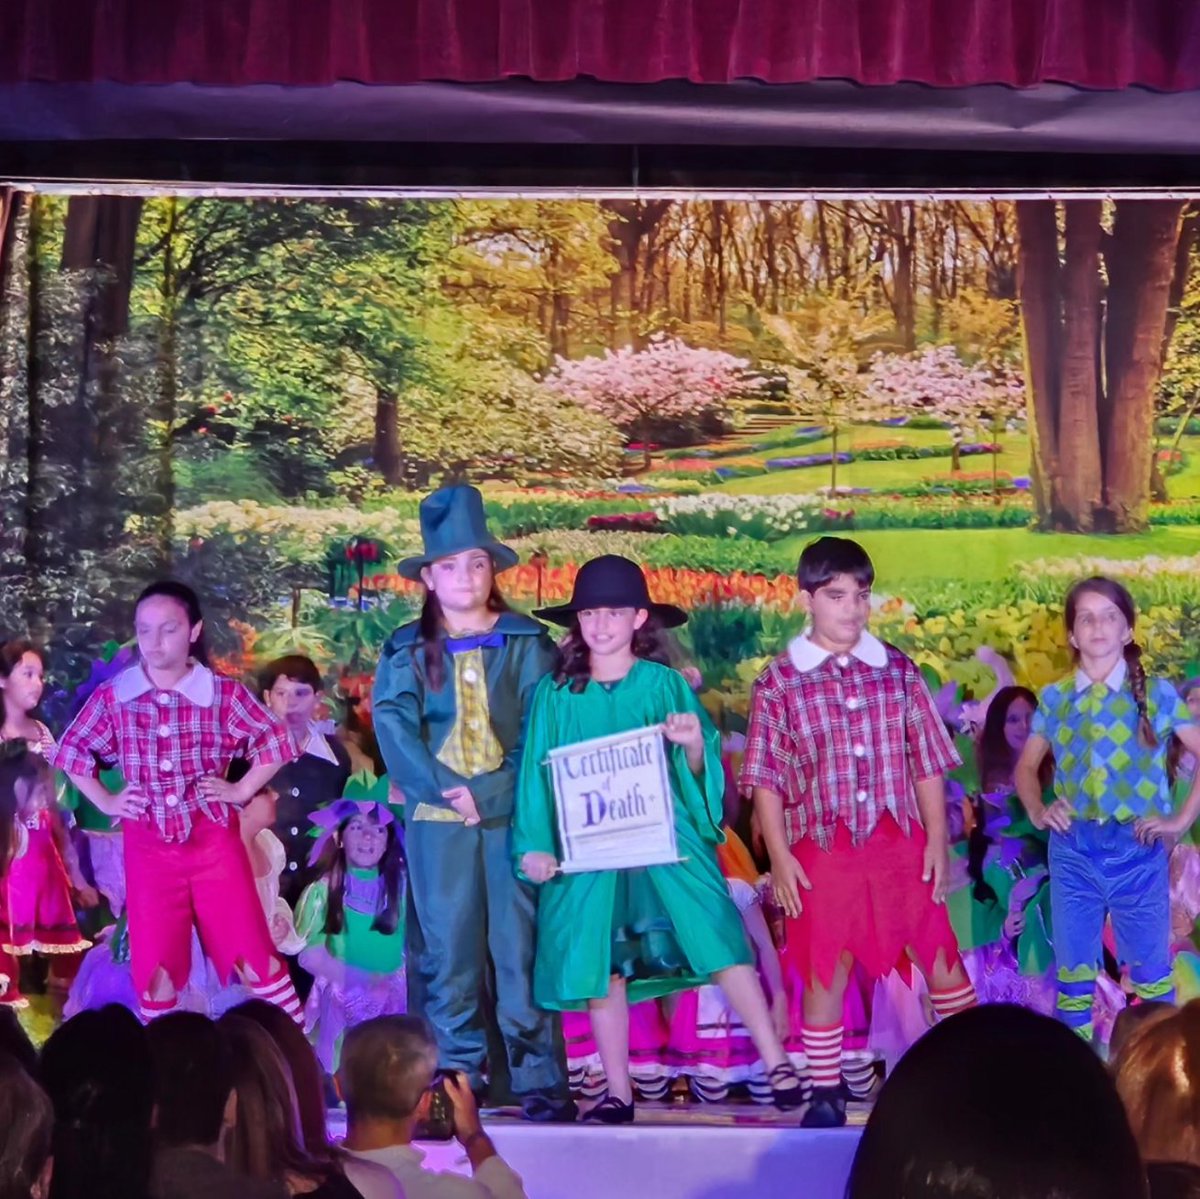 Had a great time watching the enormously talented youth production of The Wizard of Oz by Fiol Studio at St. Theresa School this past weekend! #CoralGables #ResidentsFirst